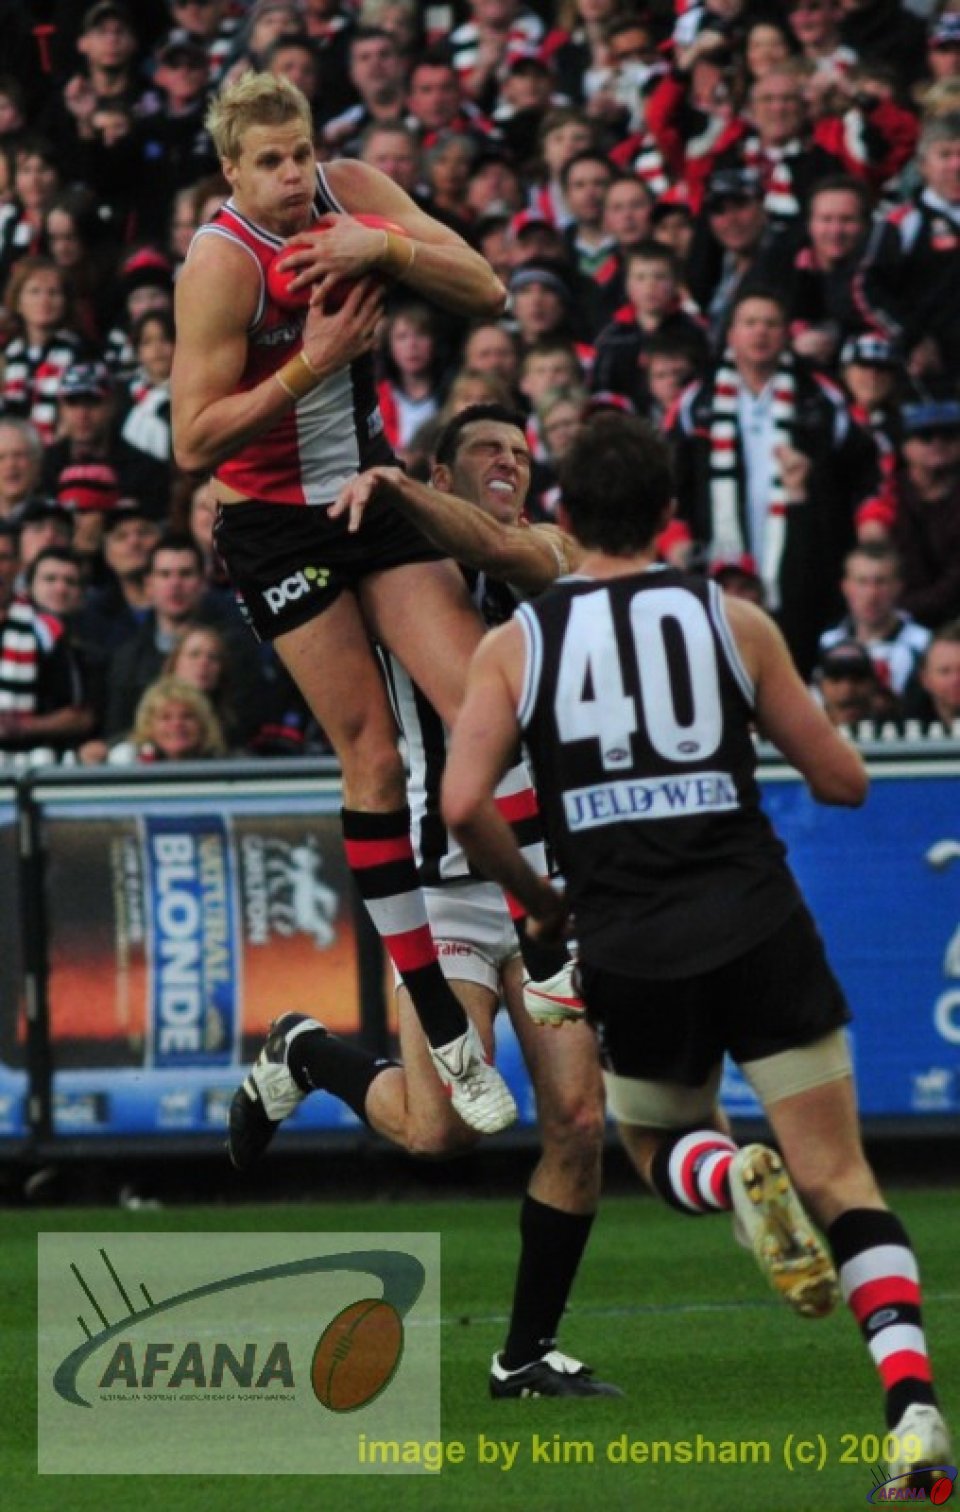 Rooey Shows His Form